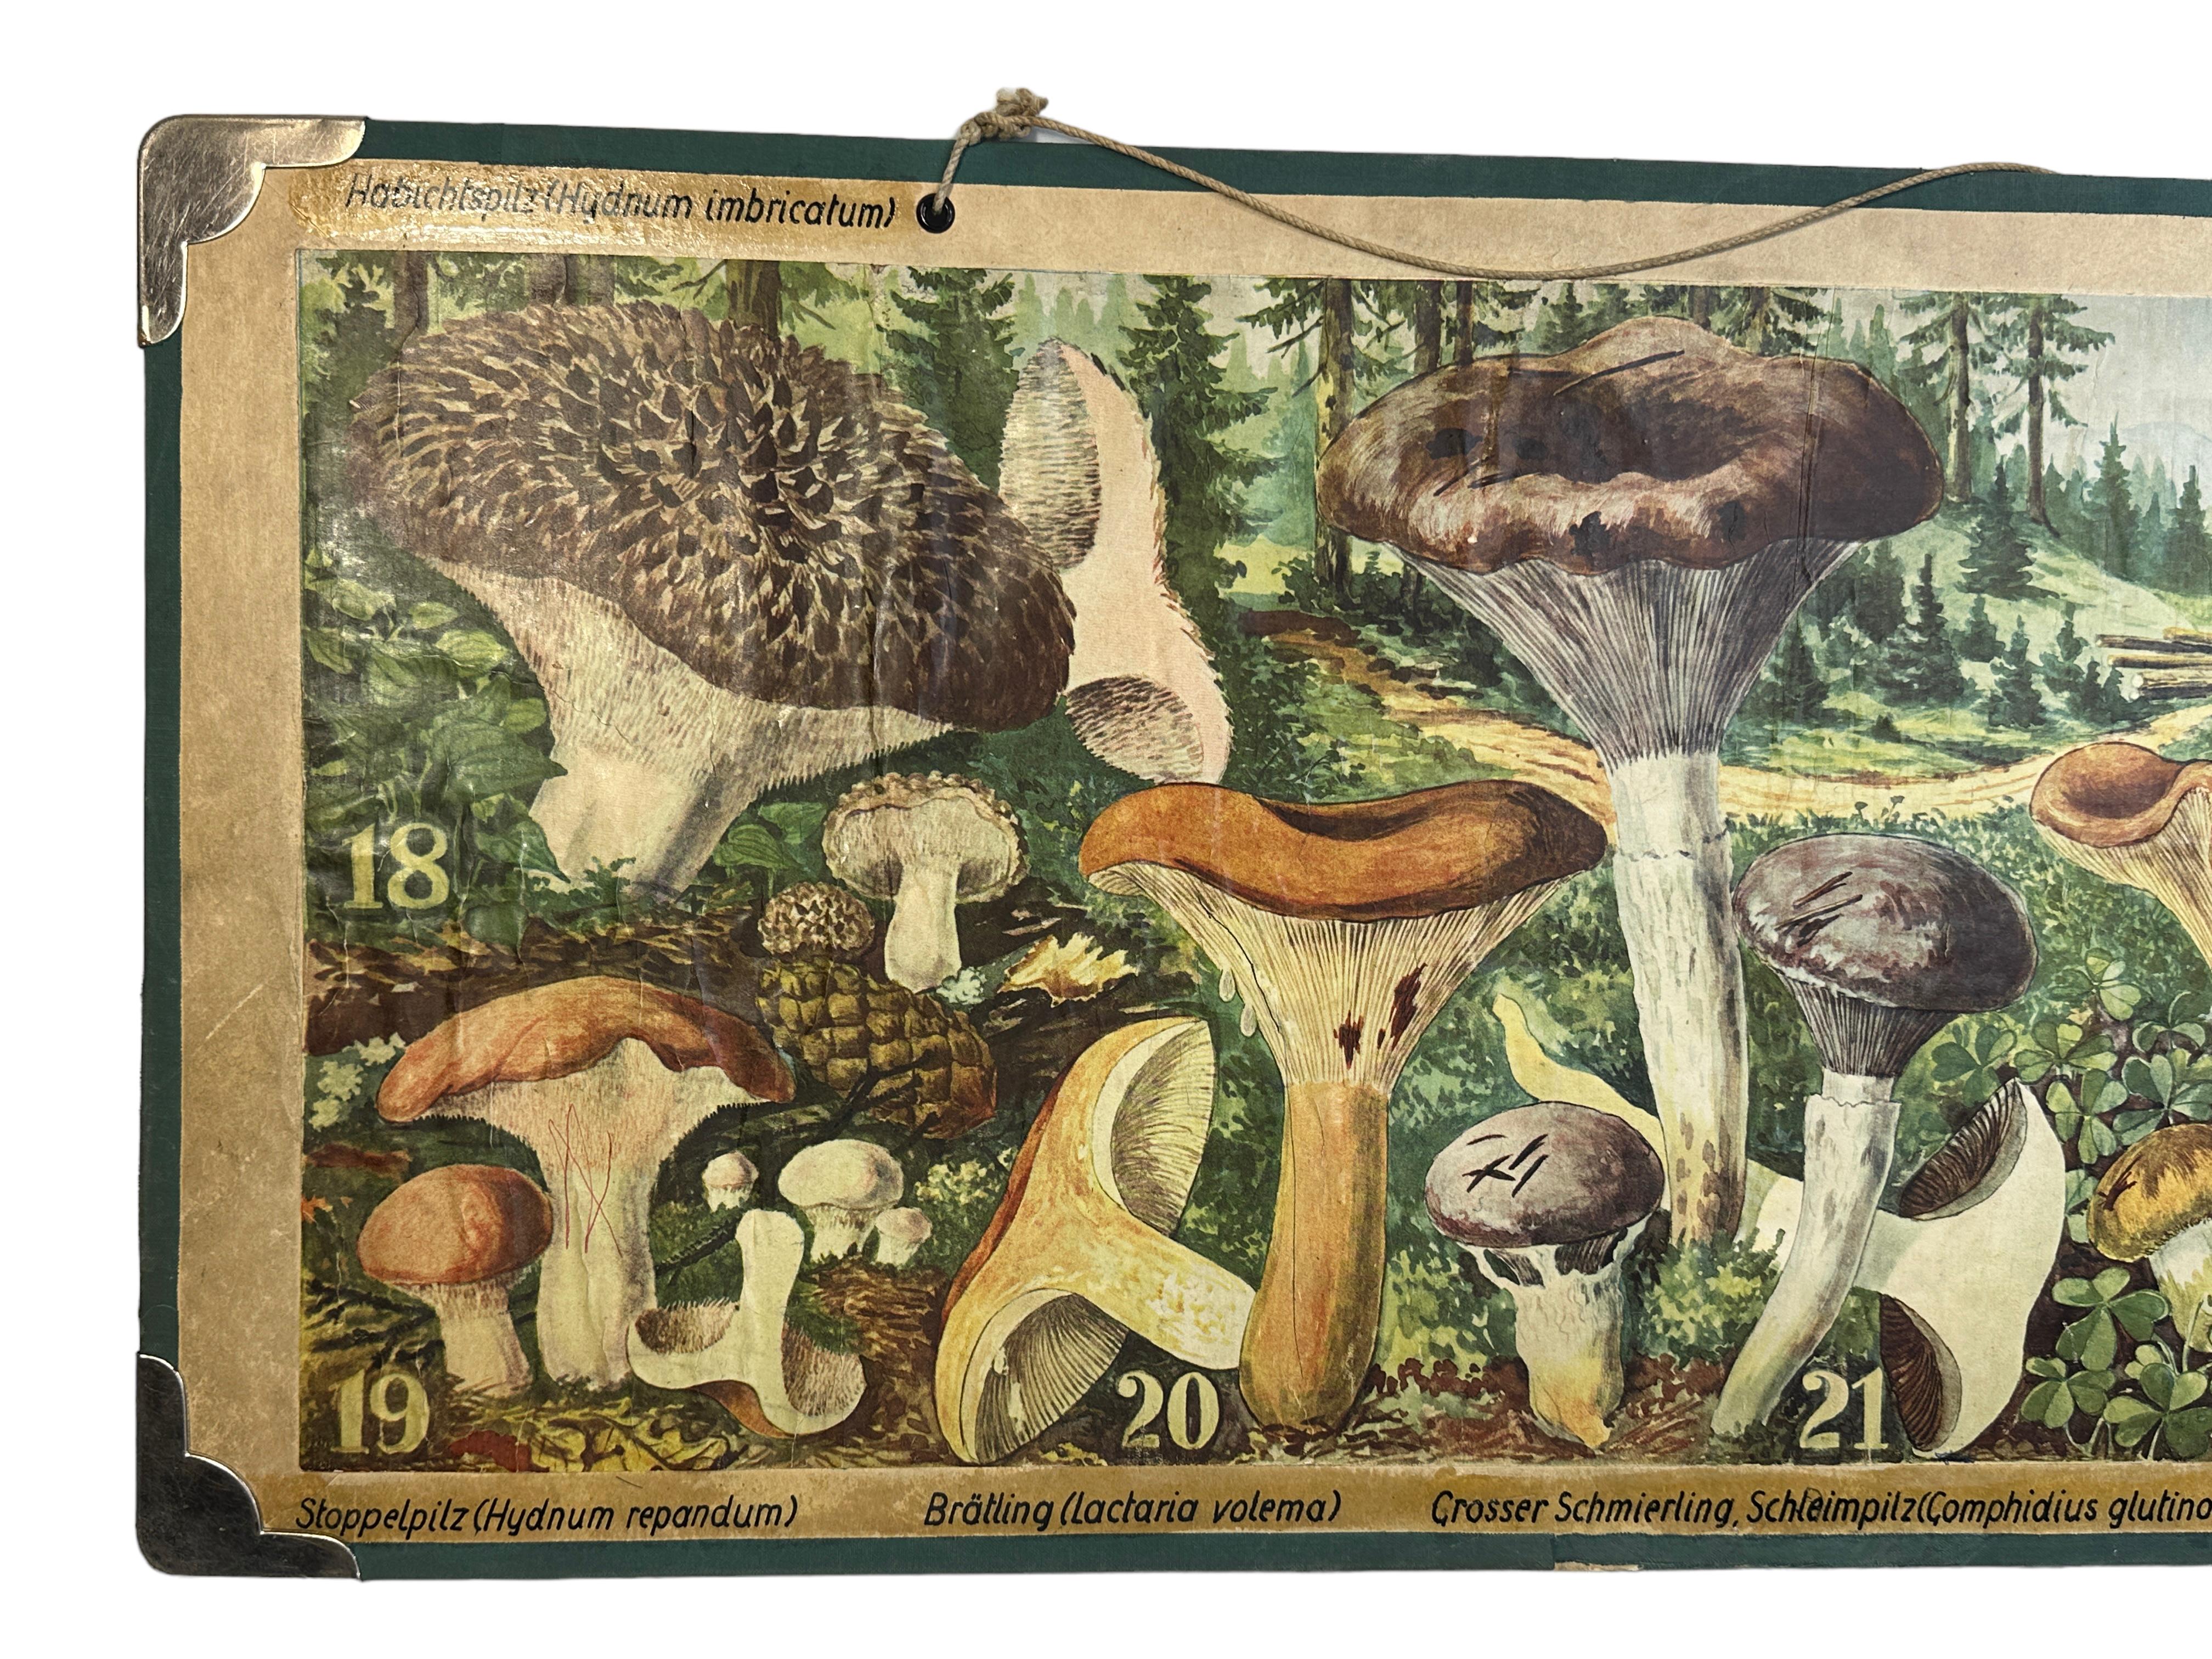 This rare vintage wall chart shows different types of mushrooms, which are native to middle europe. This kind of wall charts are used as teaching material in German schools. Colorful print on reinforced Cardboard. 
This type of learning material is